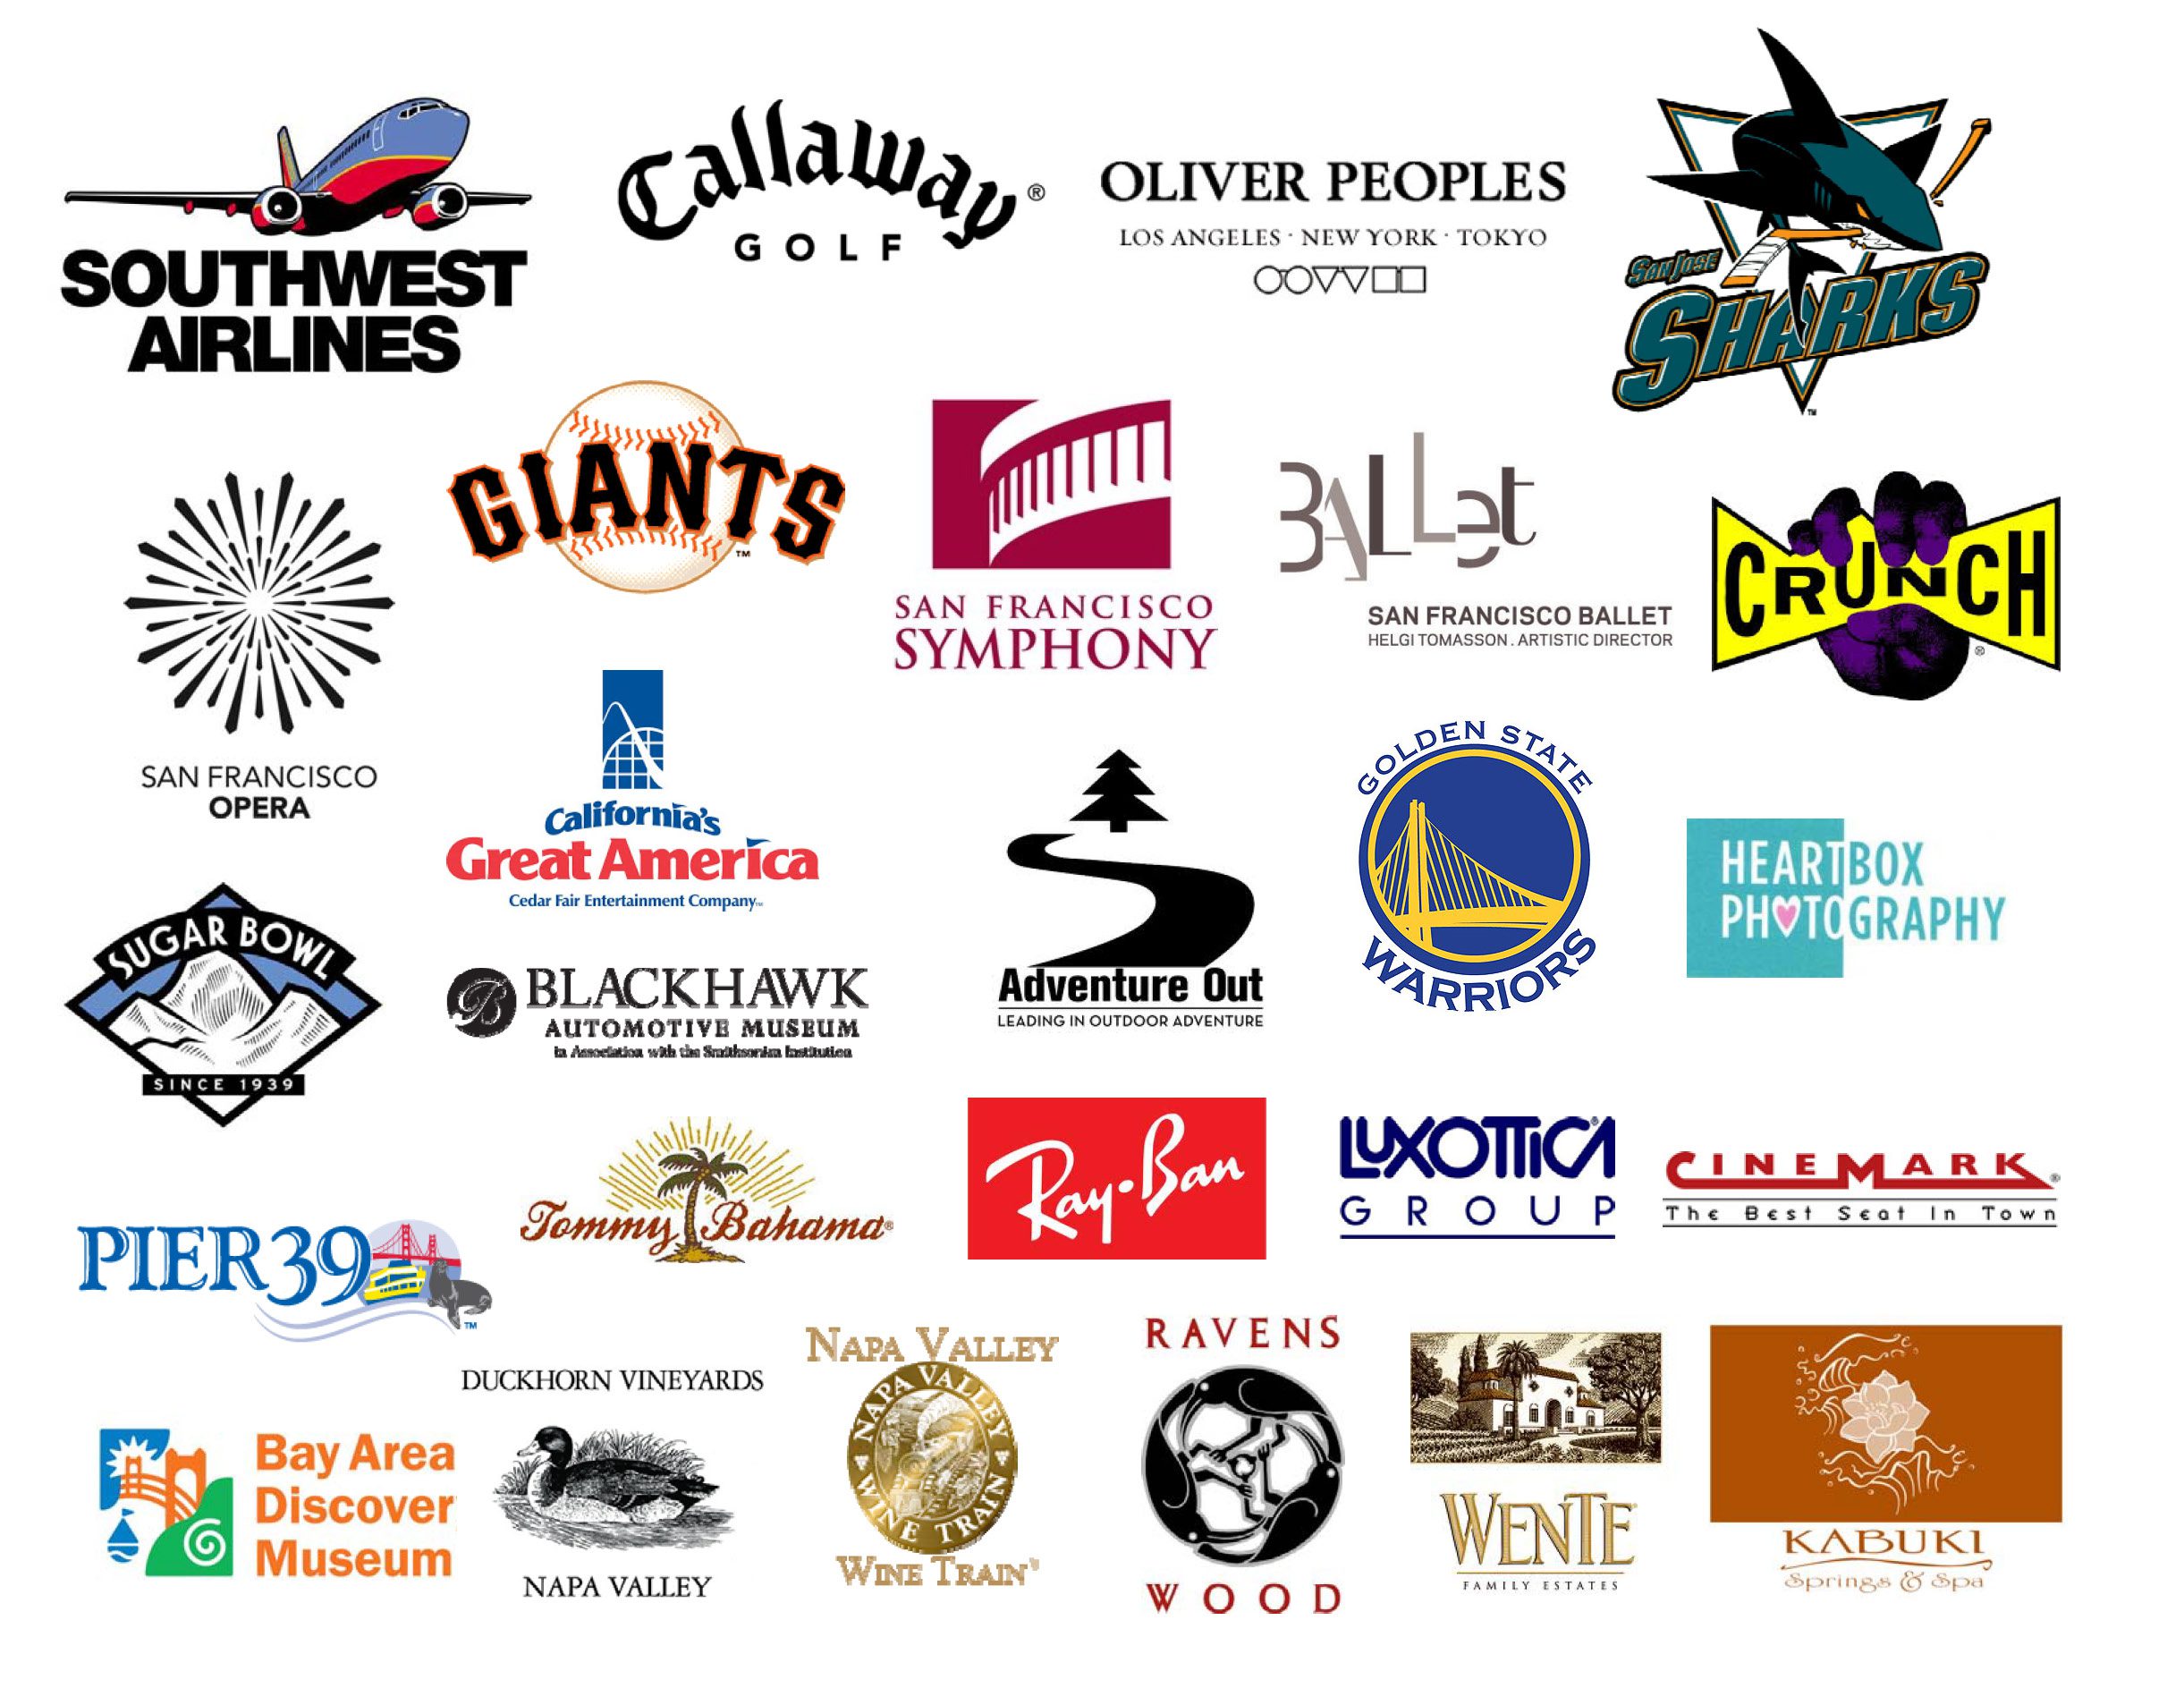 List of brands that have donated items to support the silent auction such as Southwest Airlines, and Callaway Golf